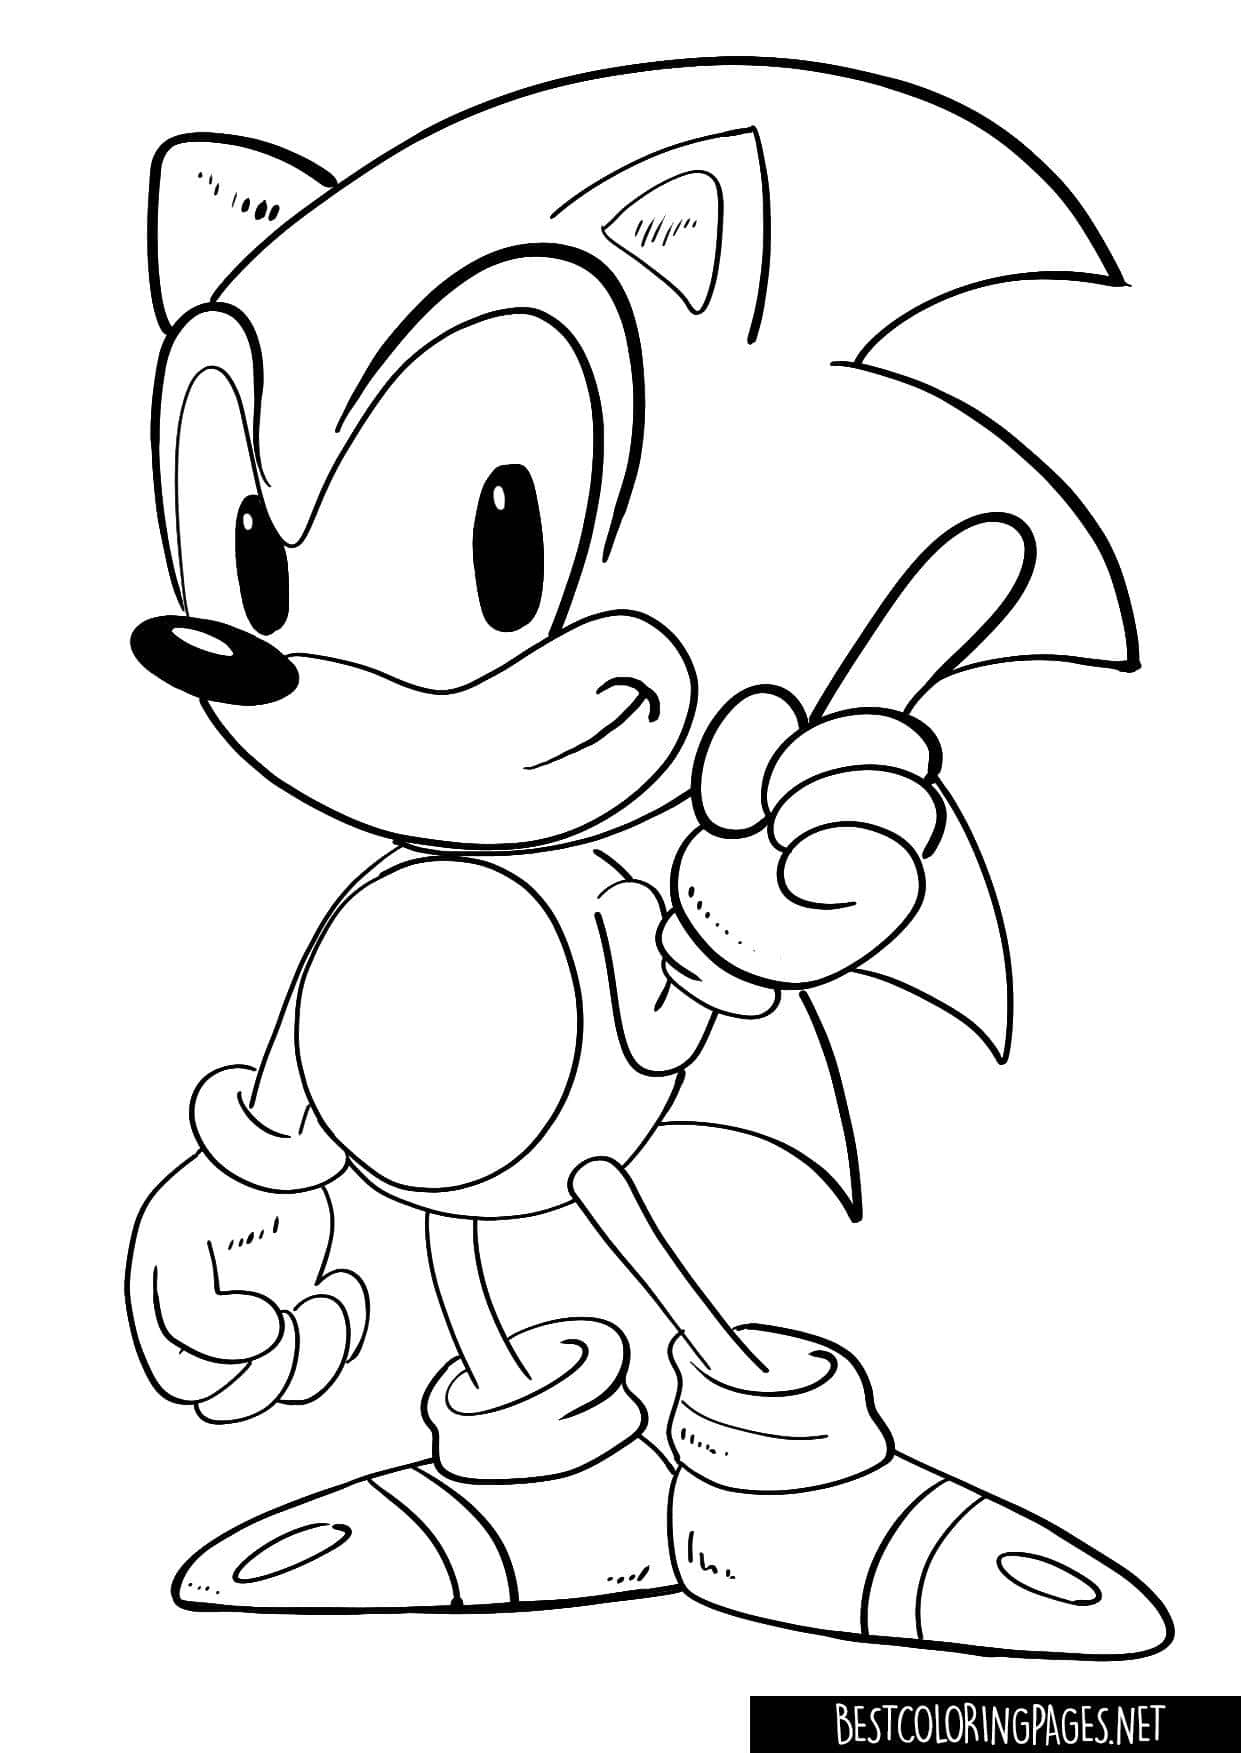 Sonic Coloring Cute Standing With Pointing Finger Picture